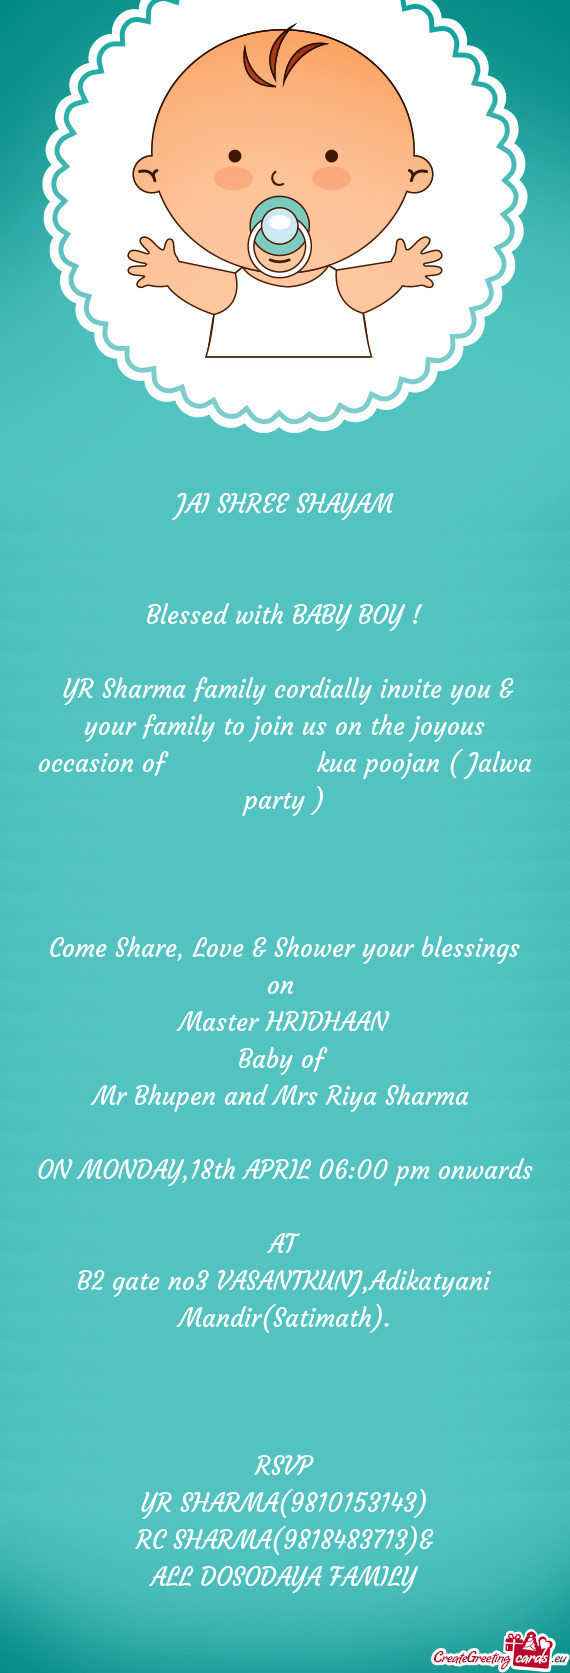 YR Sharma family cordially invite you & your family to join us on the joyous occasion of